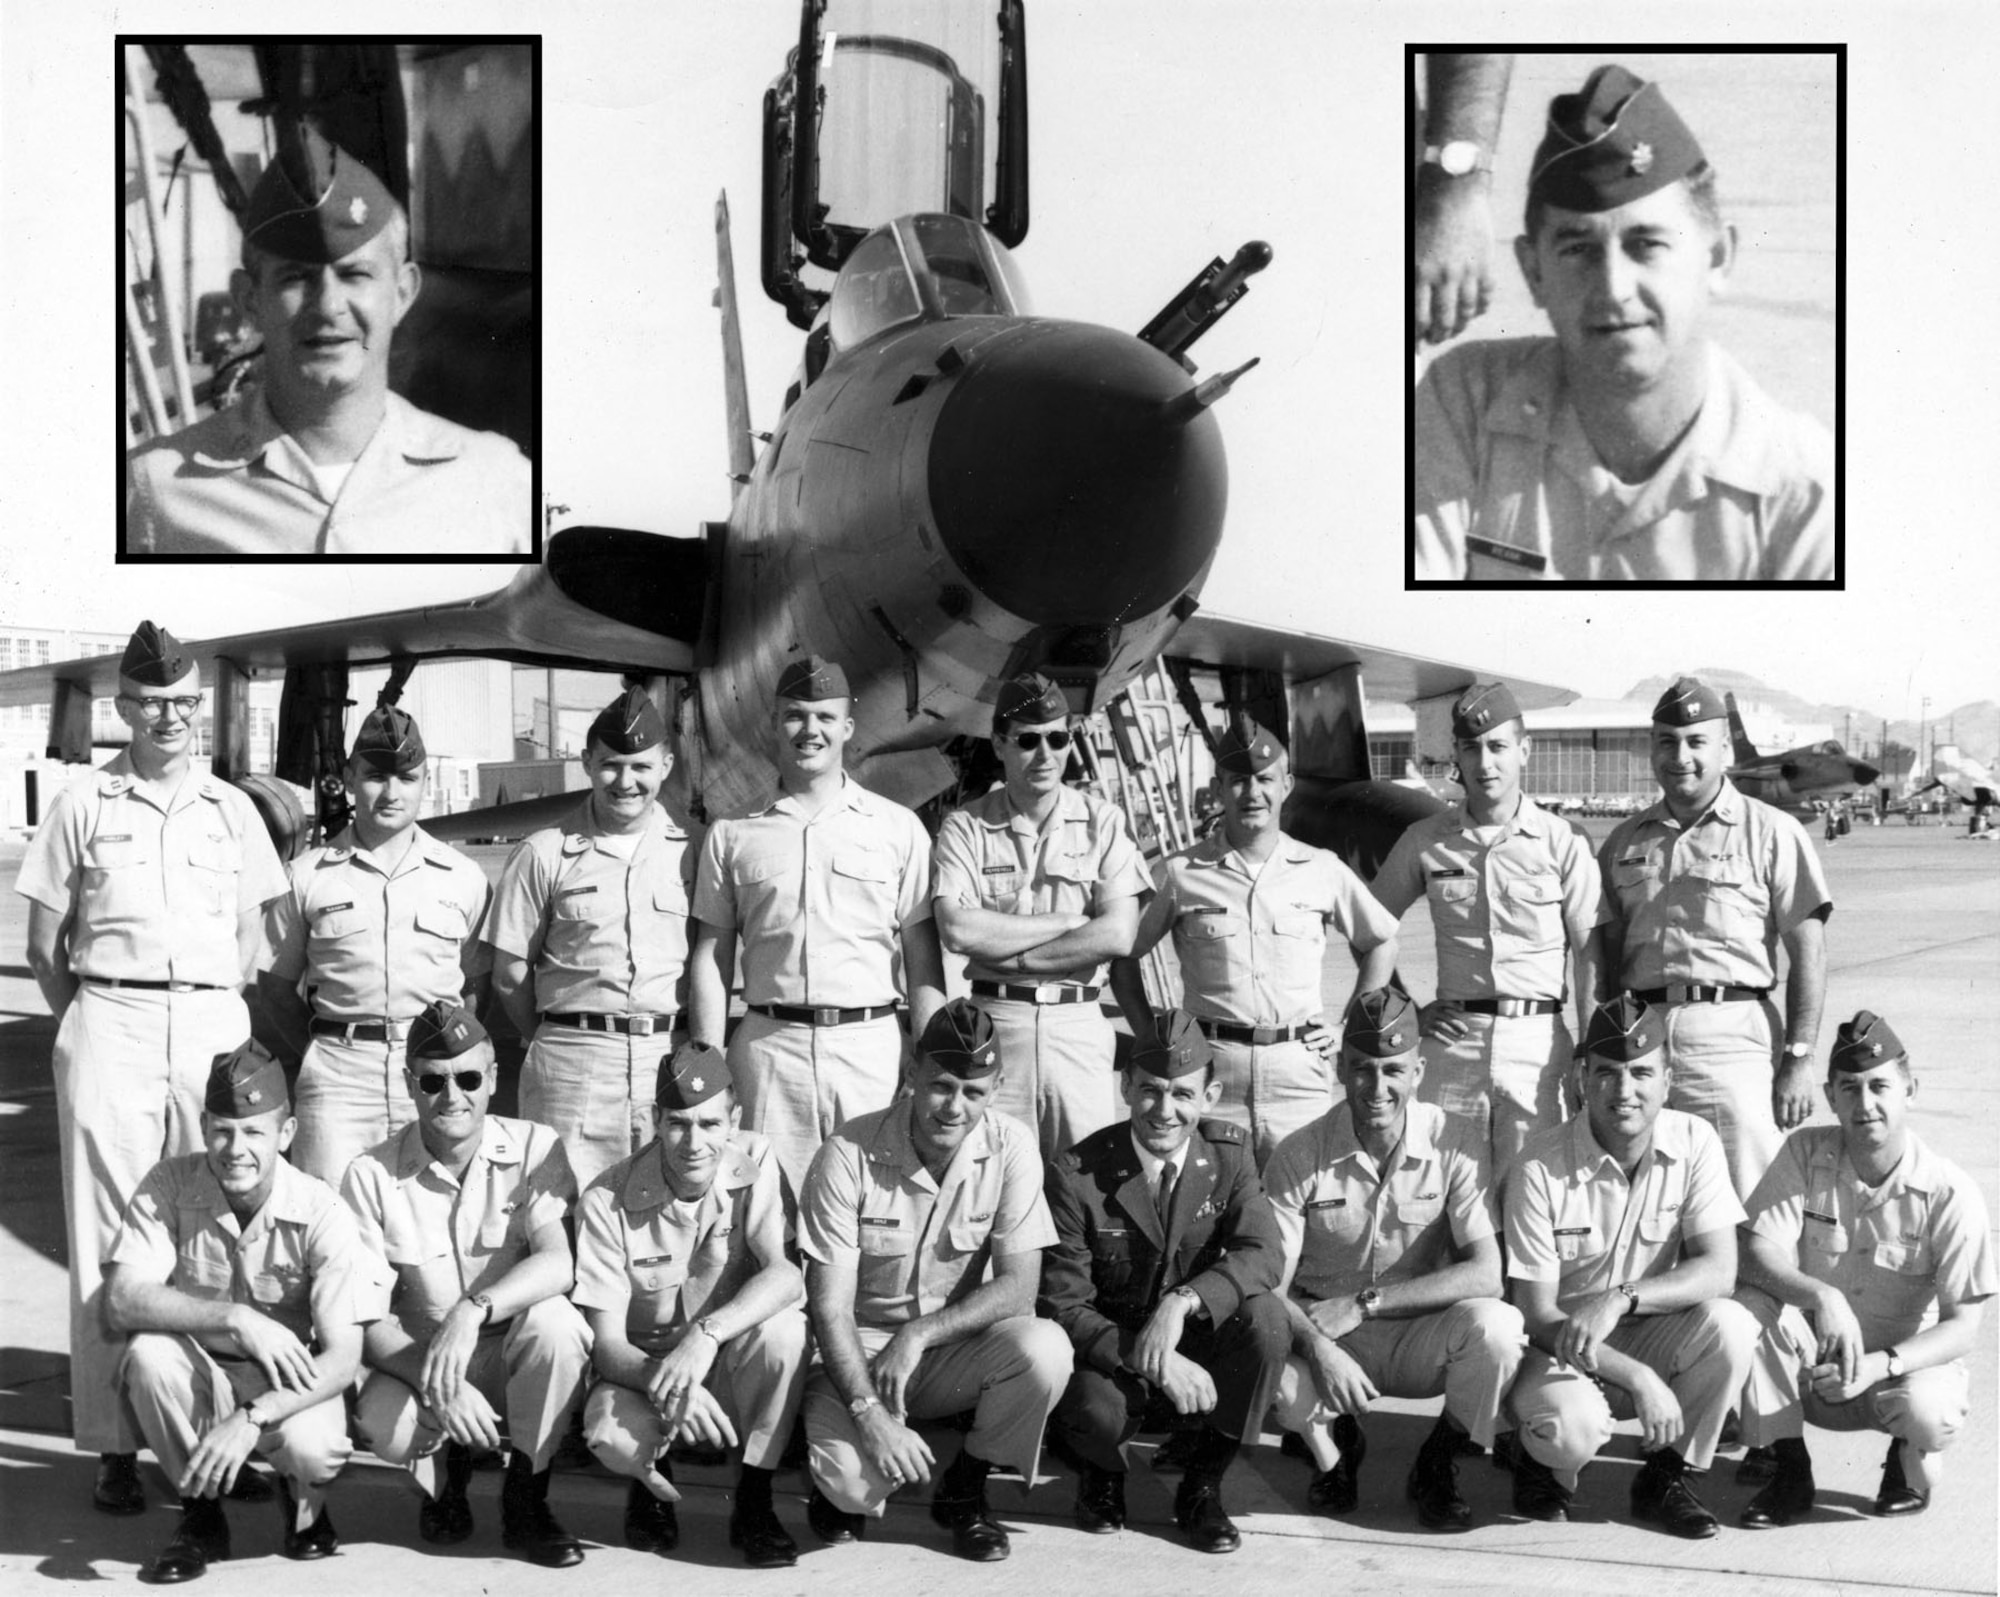 Majs. Revak and Goldstein entered Wild Weasel Class III-17 at Nellis AFB in October 1967. (Revak is first on the right kneeling and Goldstein is third from right standing). (U.S. Air Force photo)